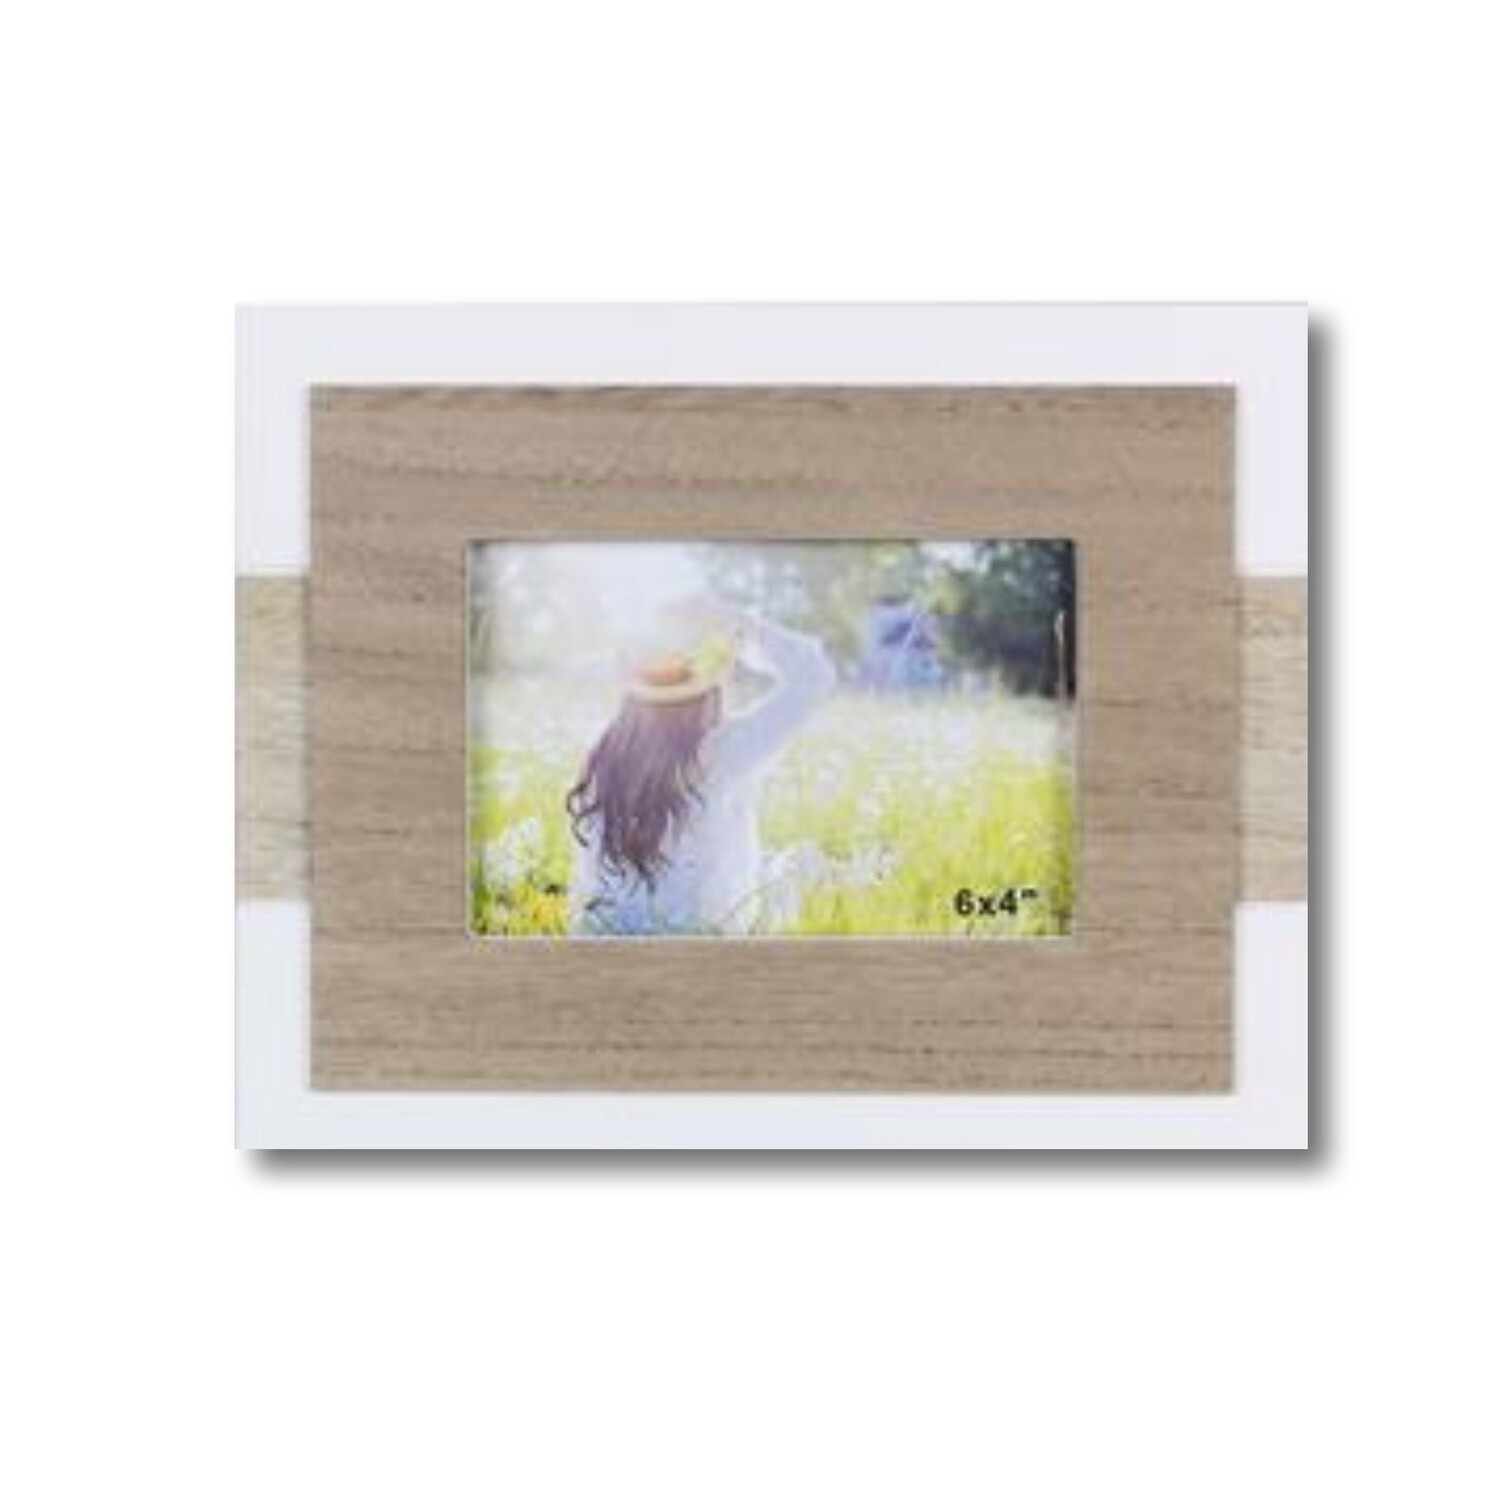 Wooden Natural 4x6 Picture Frame